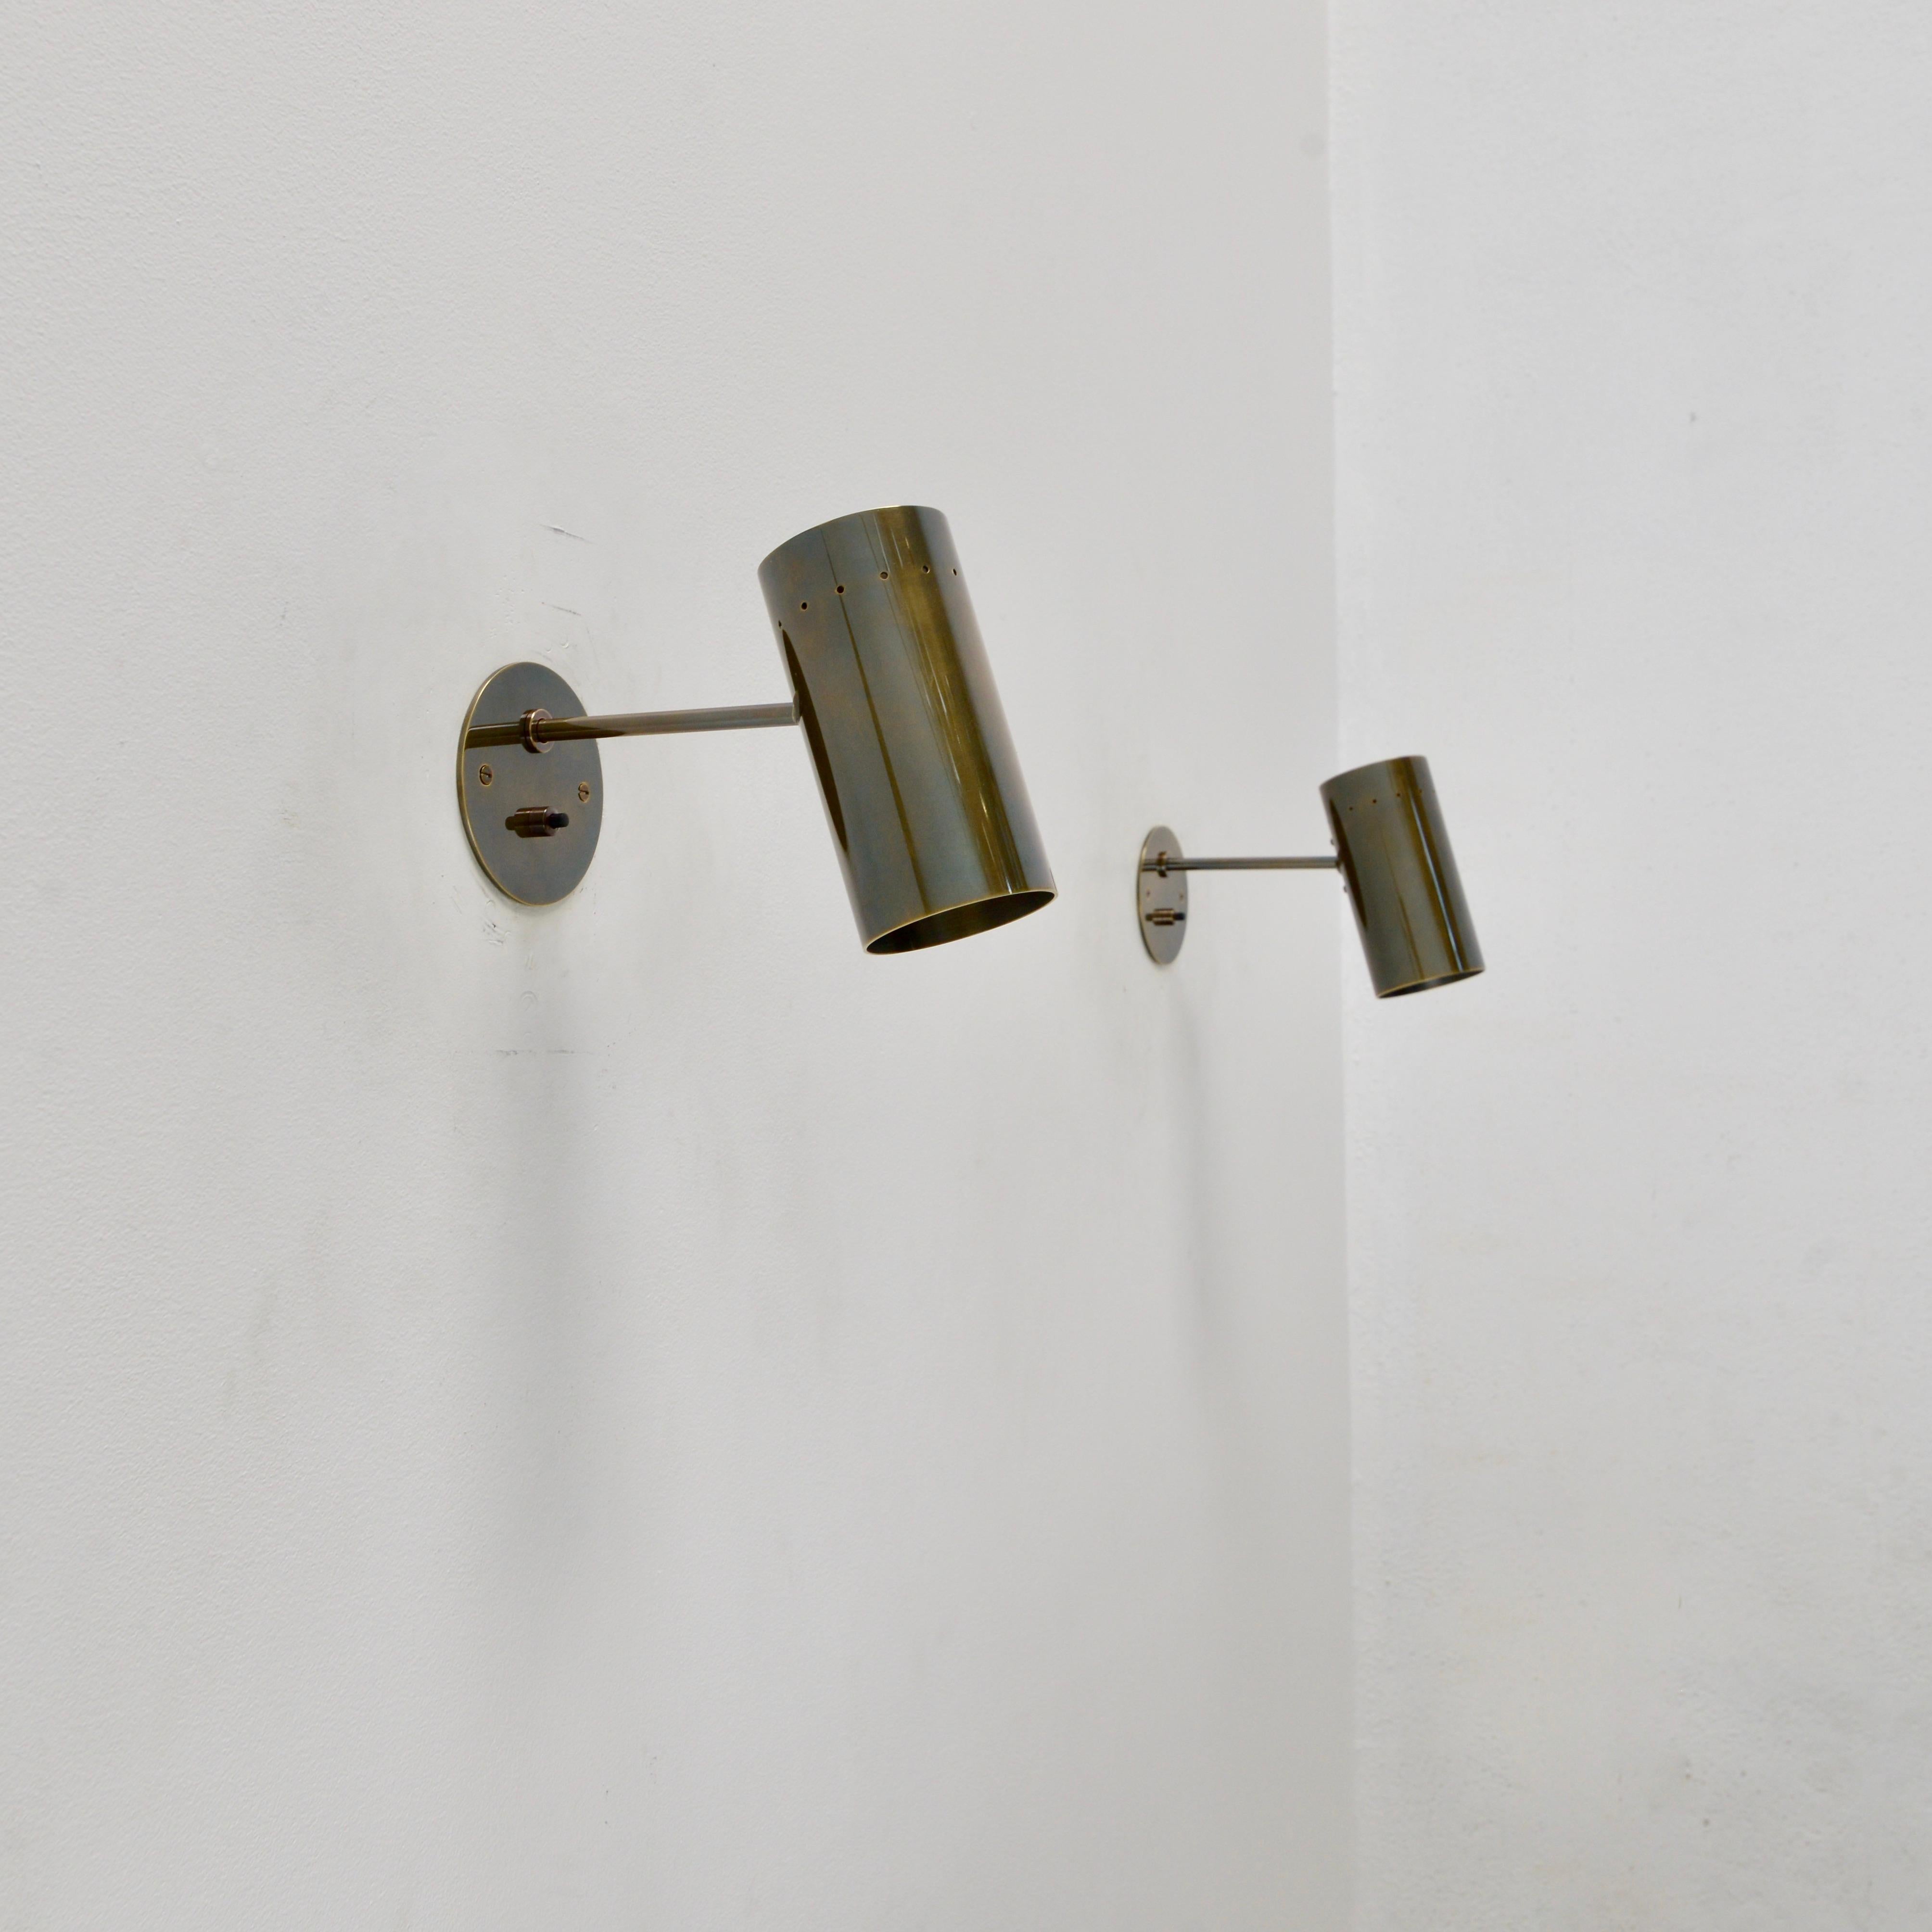 Part of our Lumfardo Luminaries contemporary collection, the LUpipa all brass sconce is a directional reading sconce in a patina brass finish. A smaller version of our LUbular sconce it is wired with a single E26 socket for use in the US. But can be